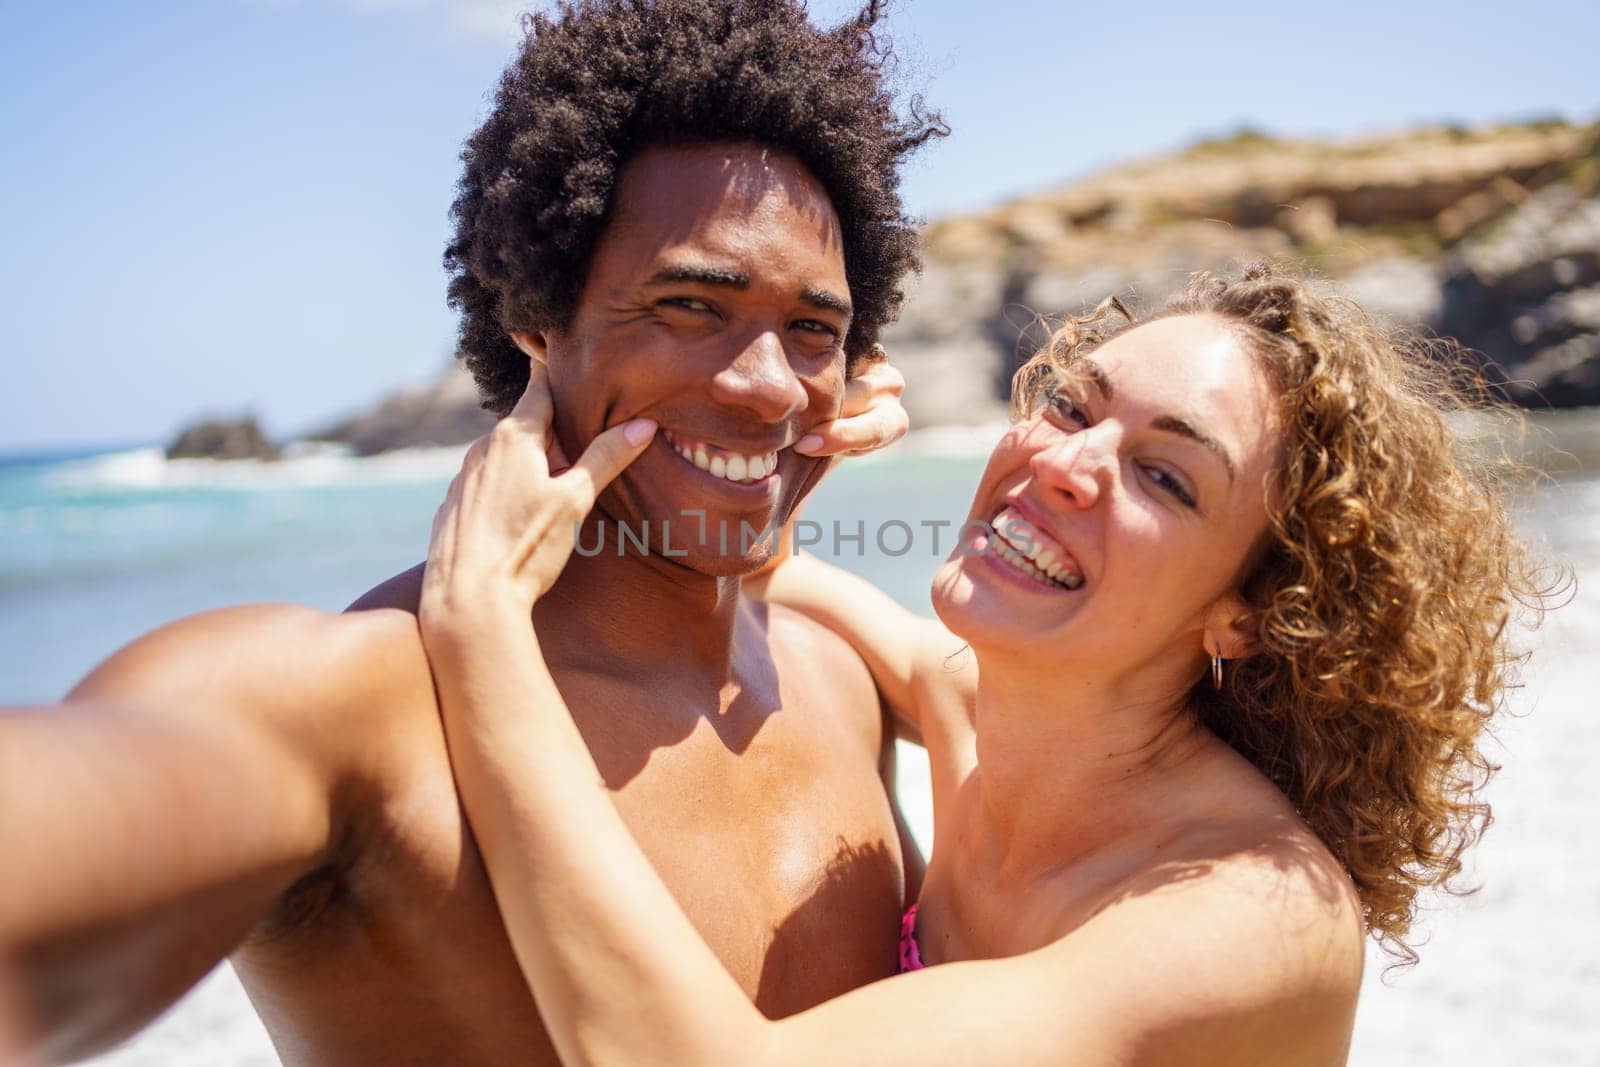 Cheerful young woman pulling smile on black boyfriend with Afro hair by stretching corners of mouth while taking selfie on beach during summer vacation